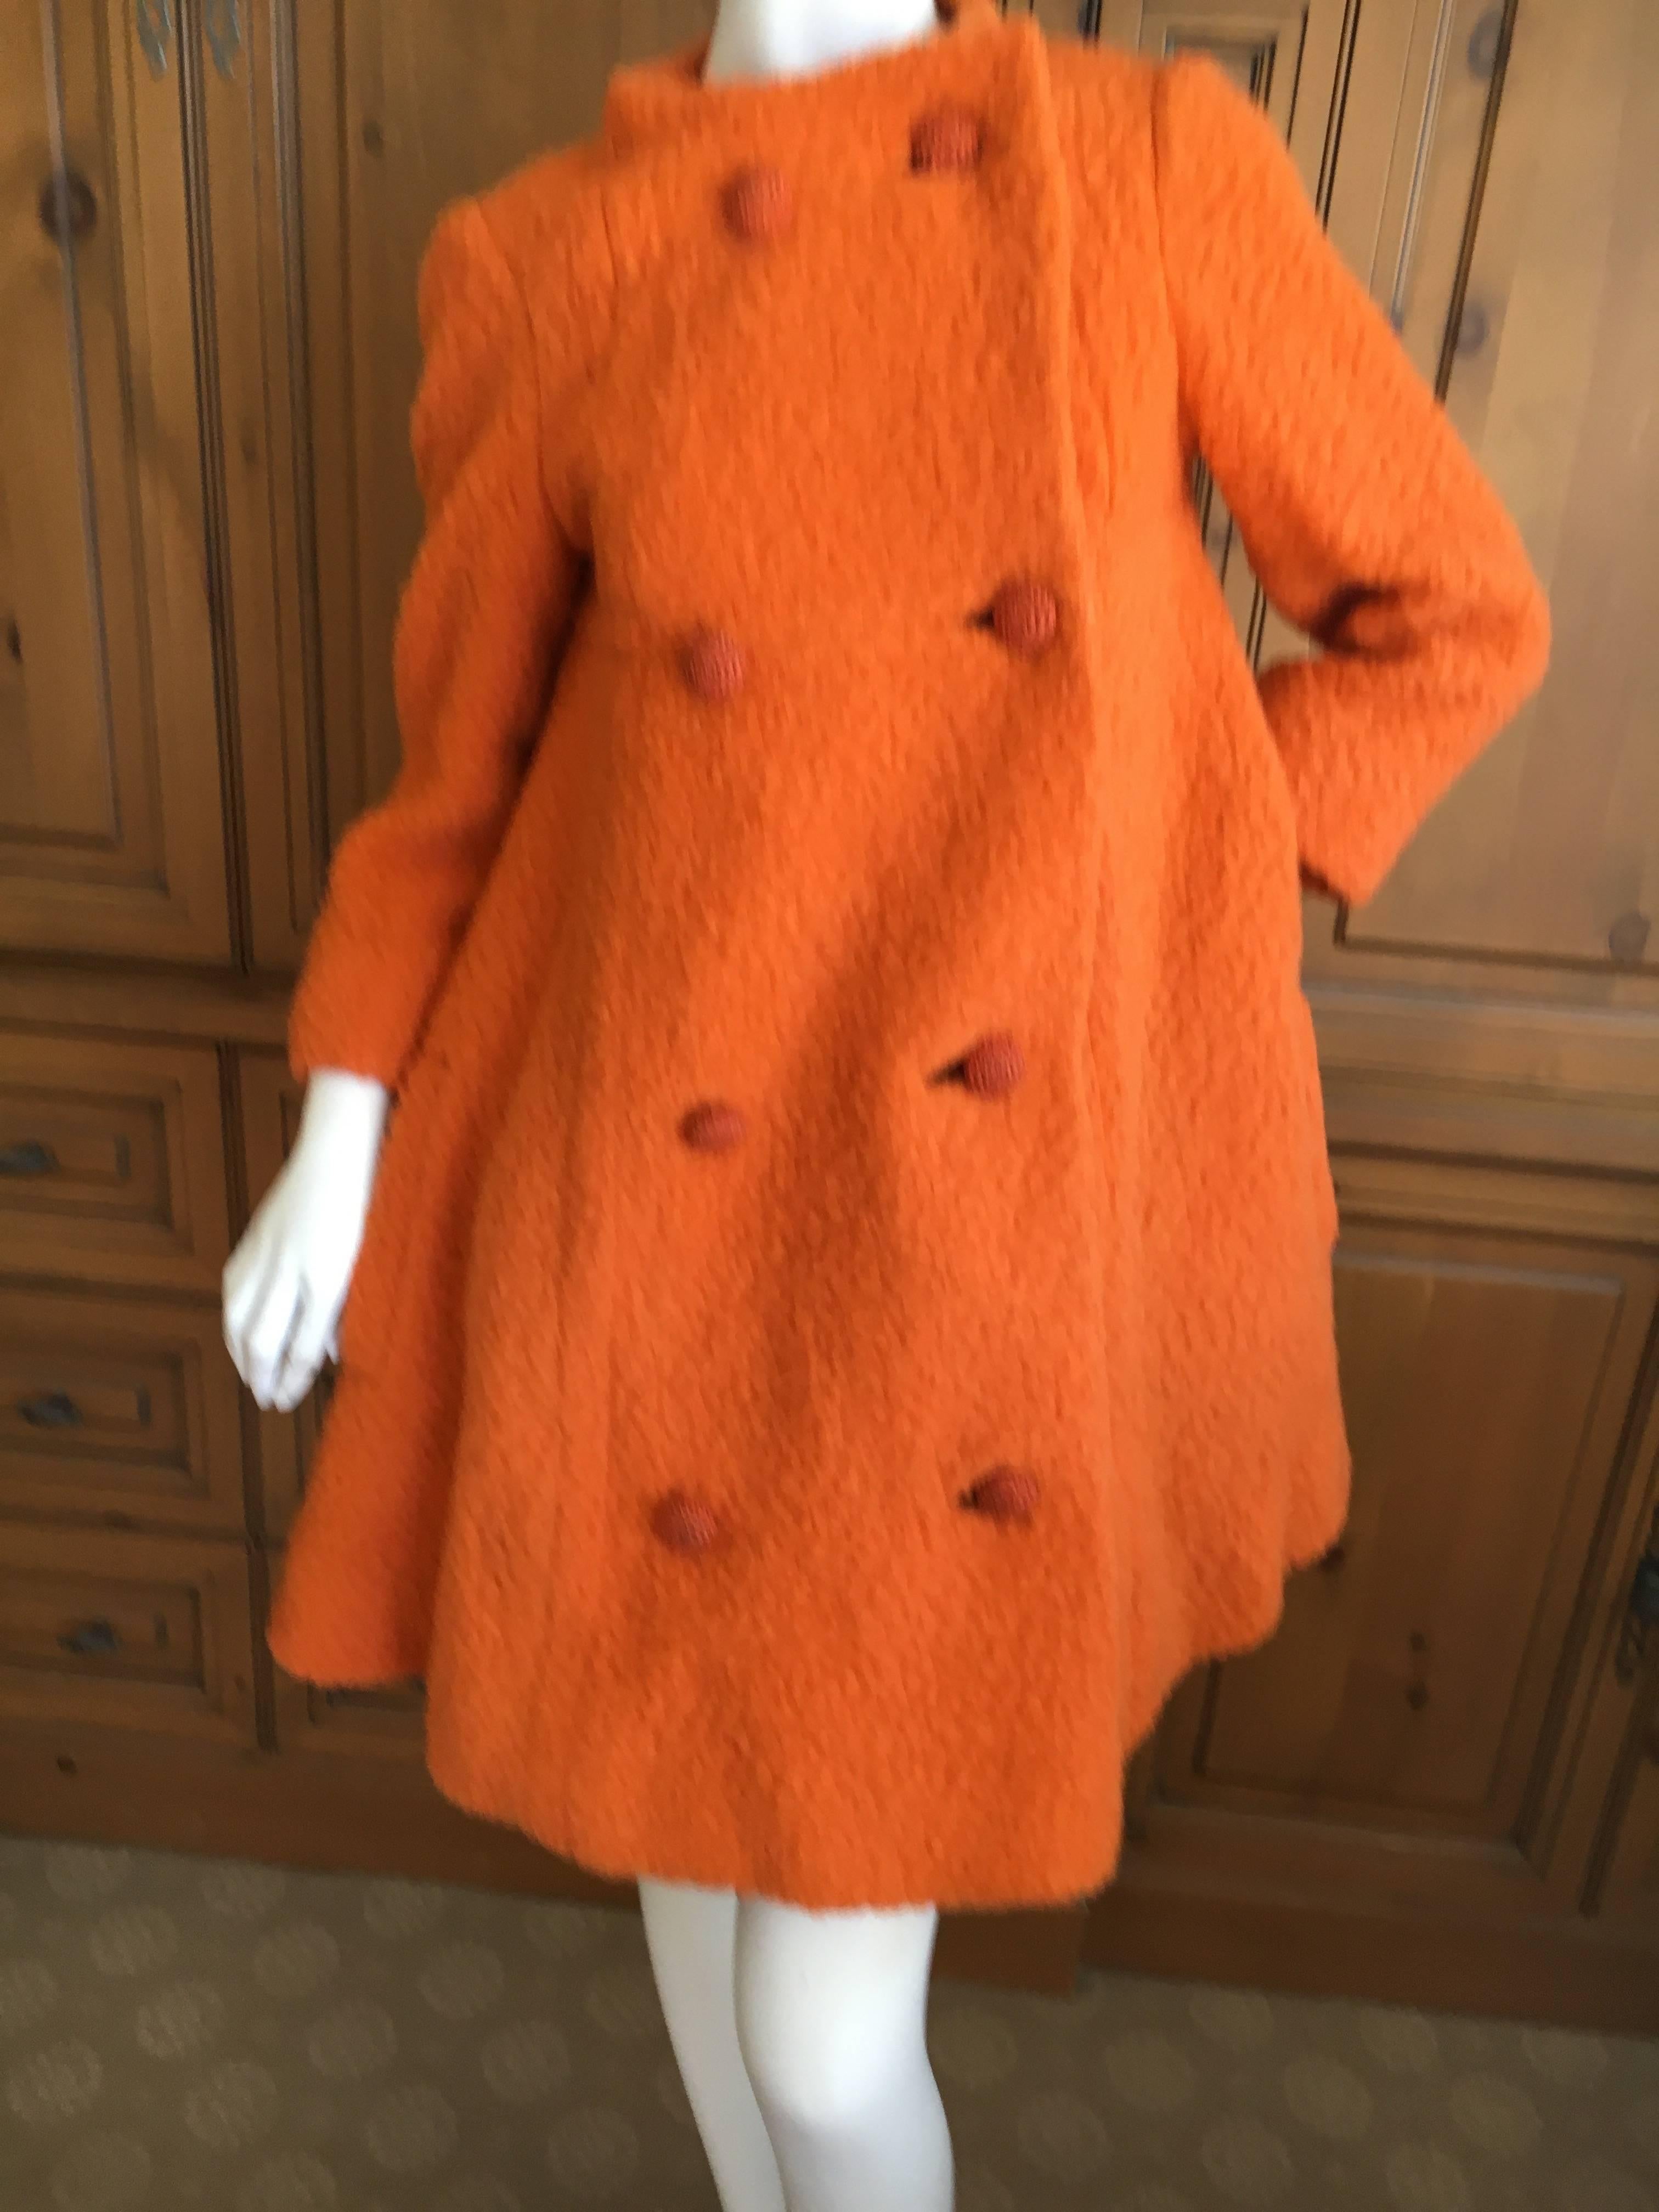 Bergdorf Goodman 1965 Babydoll Boucle A Line Swing Coat.
This is so sweet, so Mia Farrow Rosemary's Baby.
A perfect maternity coat.
Very textural nubby boucle in tangerine orange.
The lining is a fine irridescent silk, which is damaged under each